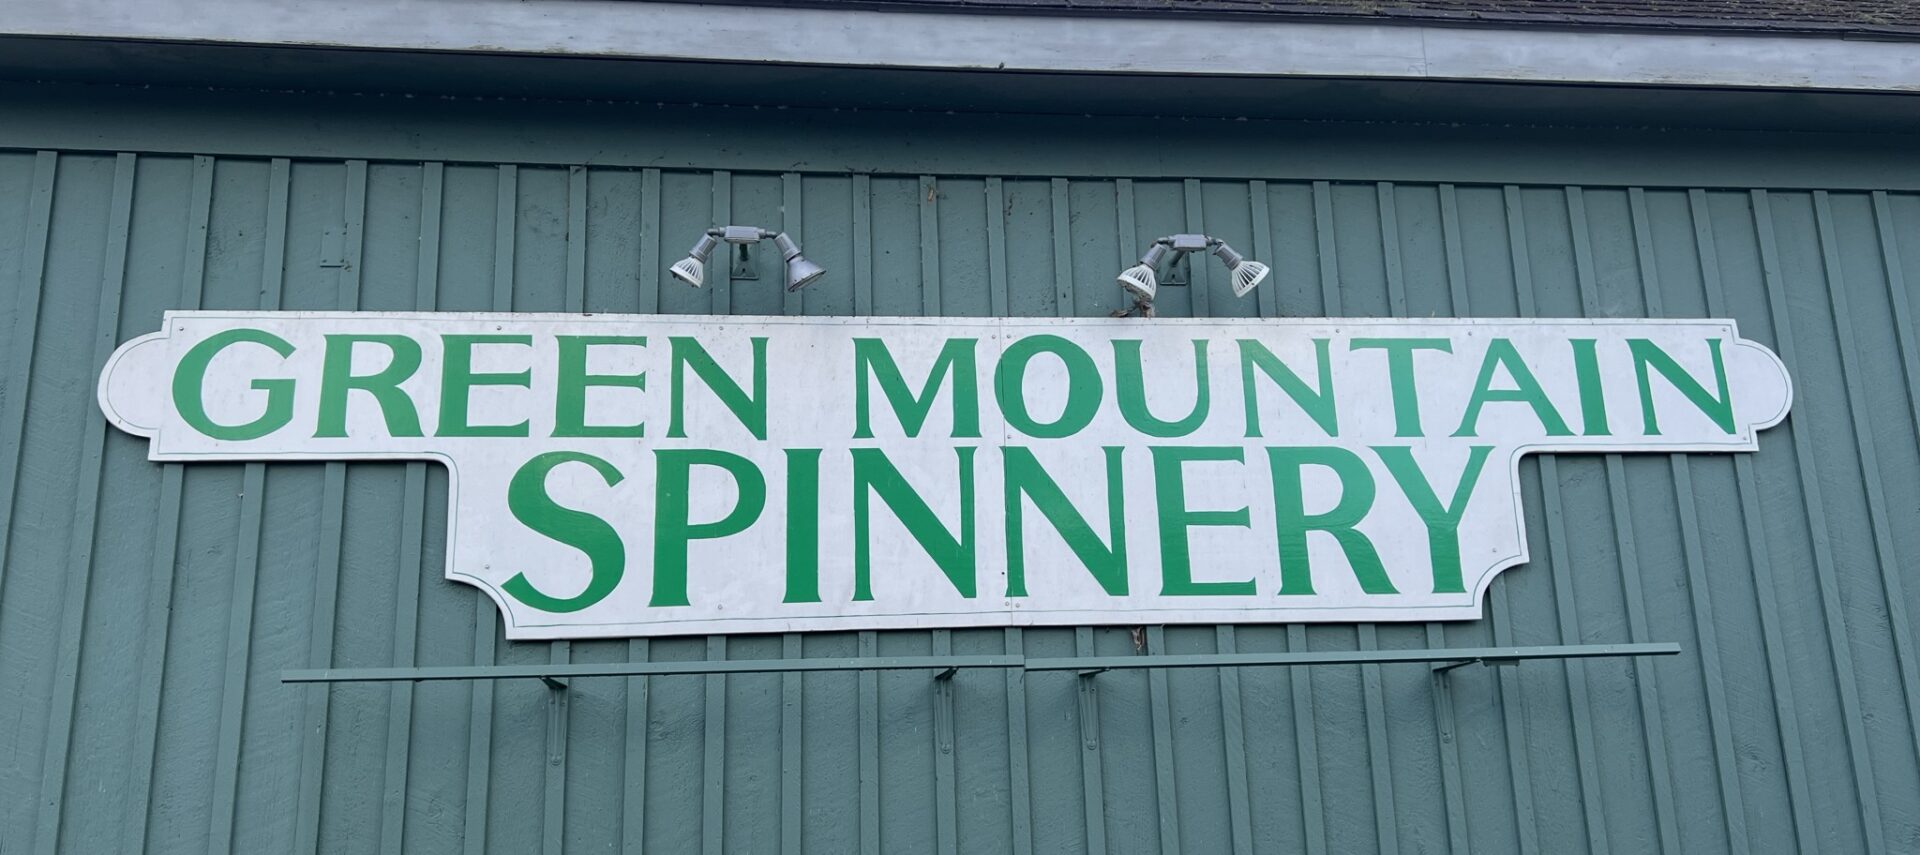 Green Mountain Spinnery Outdoor sign